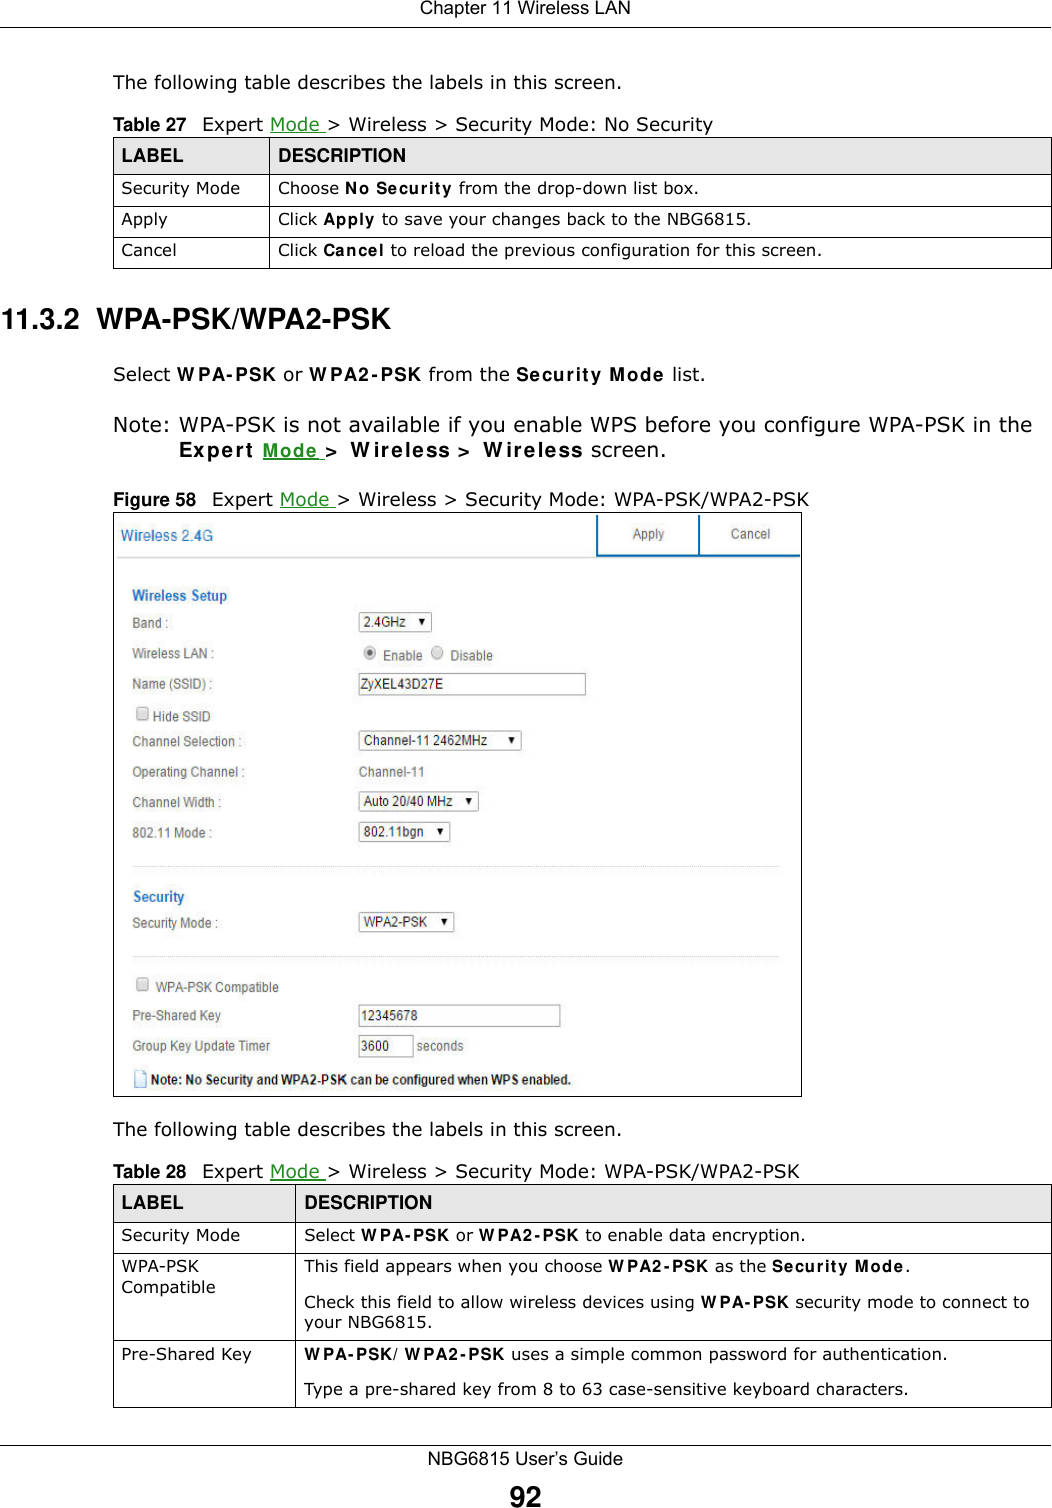 Chapter 11 Wireless LANNBG6815 User’s Guide92The following table describes the labels in this screen.11.3.2  WPA-PSK/WPA2-PSKSelect WPA-PSK or WPA2-PSK from the Security Mode list.Note: WPA-PSK is not available if you enable WPS before you configure WPA-PSK in the Expert Mode &gt; Wireless &gt; Wireless screen.Figure 58   Expert Mode &gt; Wireless &gt; Security Mode: WPA-PSK/WPA2-PSKThe following table describes the labels in this screen.Table 27   Expert Mode &gt; Wireless &gt; Security Mode: No SecurityLABEL DESCRIPTIONSecurity Mode Choose No Security from the drop-down list box.Apply Click Apply to save your changes back to the NBG6815.Cancel Click Cancel to reload the previous configuration for this screen.Table 28   Expert Mode &gt; Wireless &gt; Security Mode: WPA-PSK/WPA2-PSKLABEL DESCRIPTIONSecurity Mode Select WPA-PSK or WPA2-PSK to enable data encryption.WPA-PSK CompatibleThis field appears when you choose WPA2-PSK as the Security Mode.Check this field to allow wireless devices using WPA-PSK security mode to connect to your NBG6815.Pre-Shared Key  WPA-PSK/WPA2-PSK uses a simple common password for authentication.Type a pre-shared key from 8 to 63 case-sensitive keyboard characters.